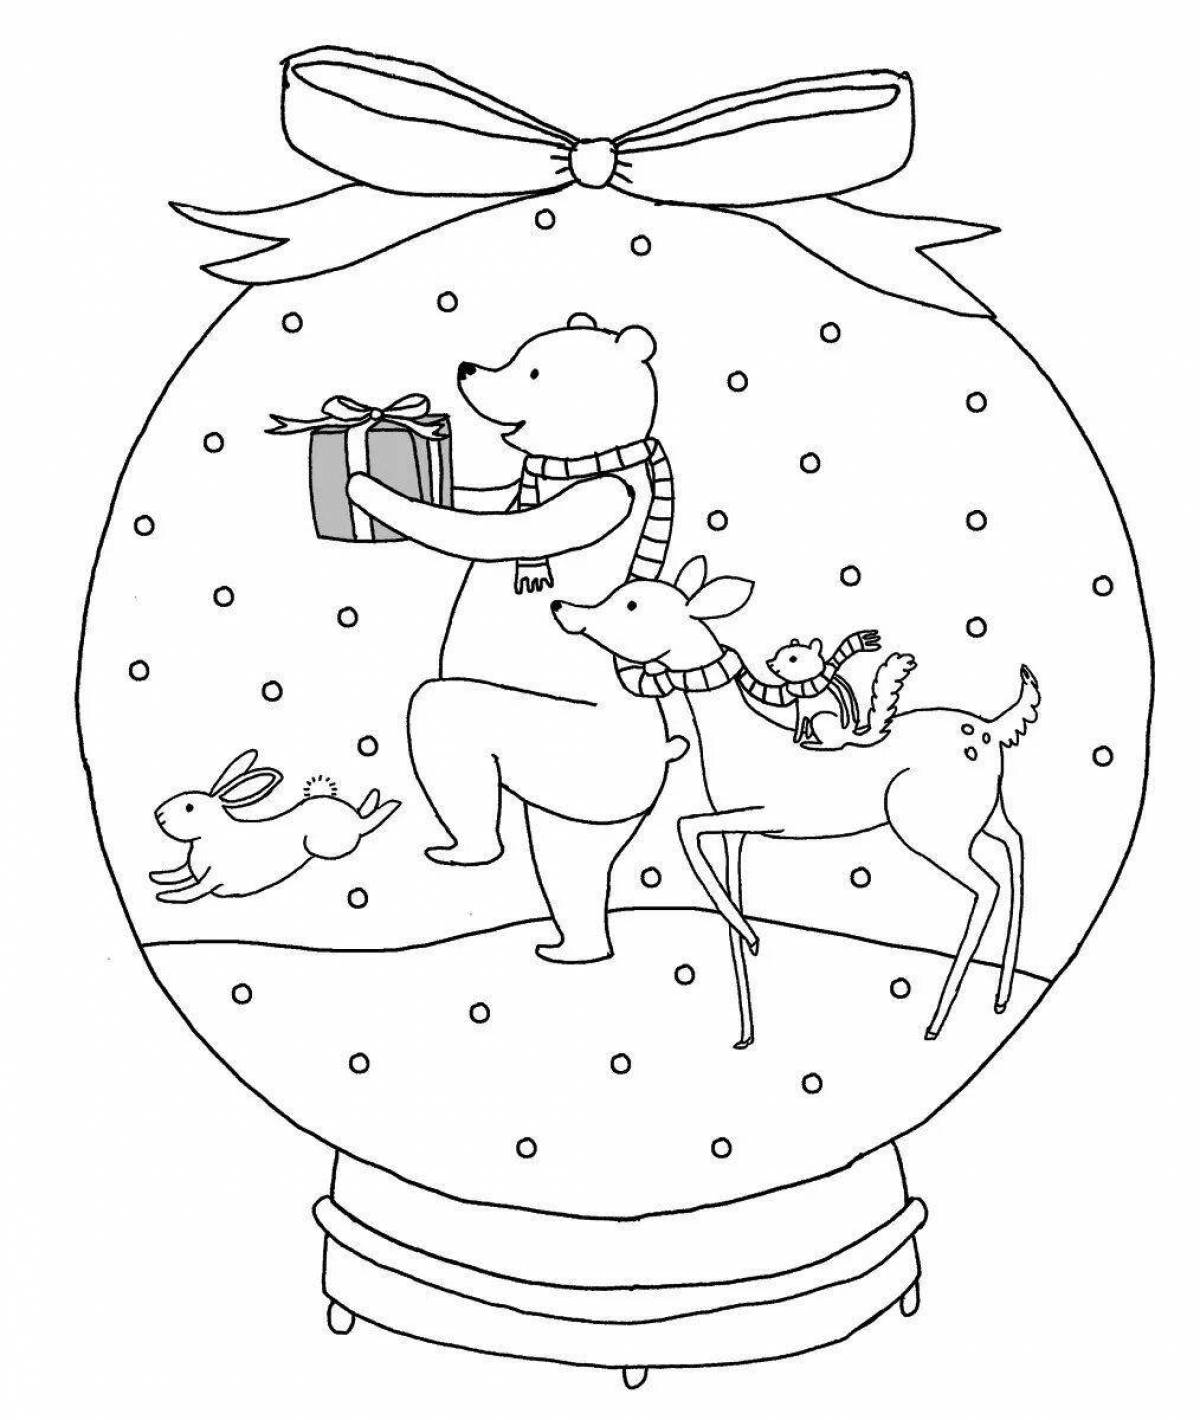 Coloring book luxury Christmas ball made of glass